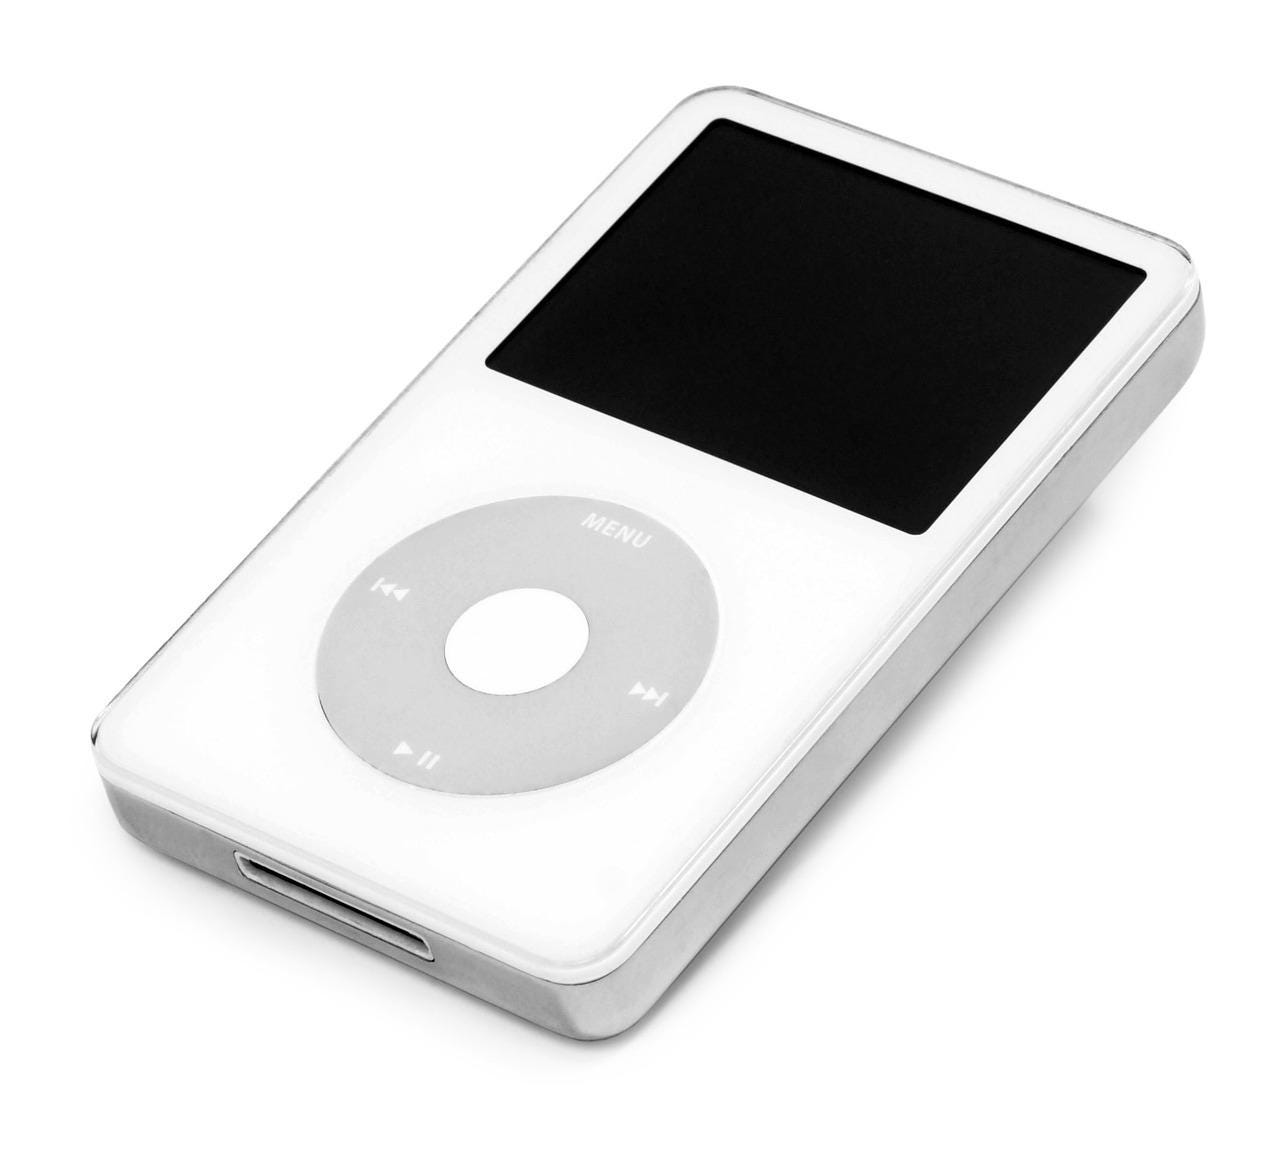 Apple Has Finally Discontinued The iPod After Nearly 21 Years